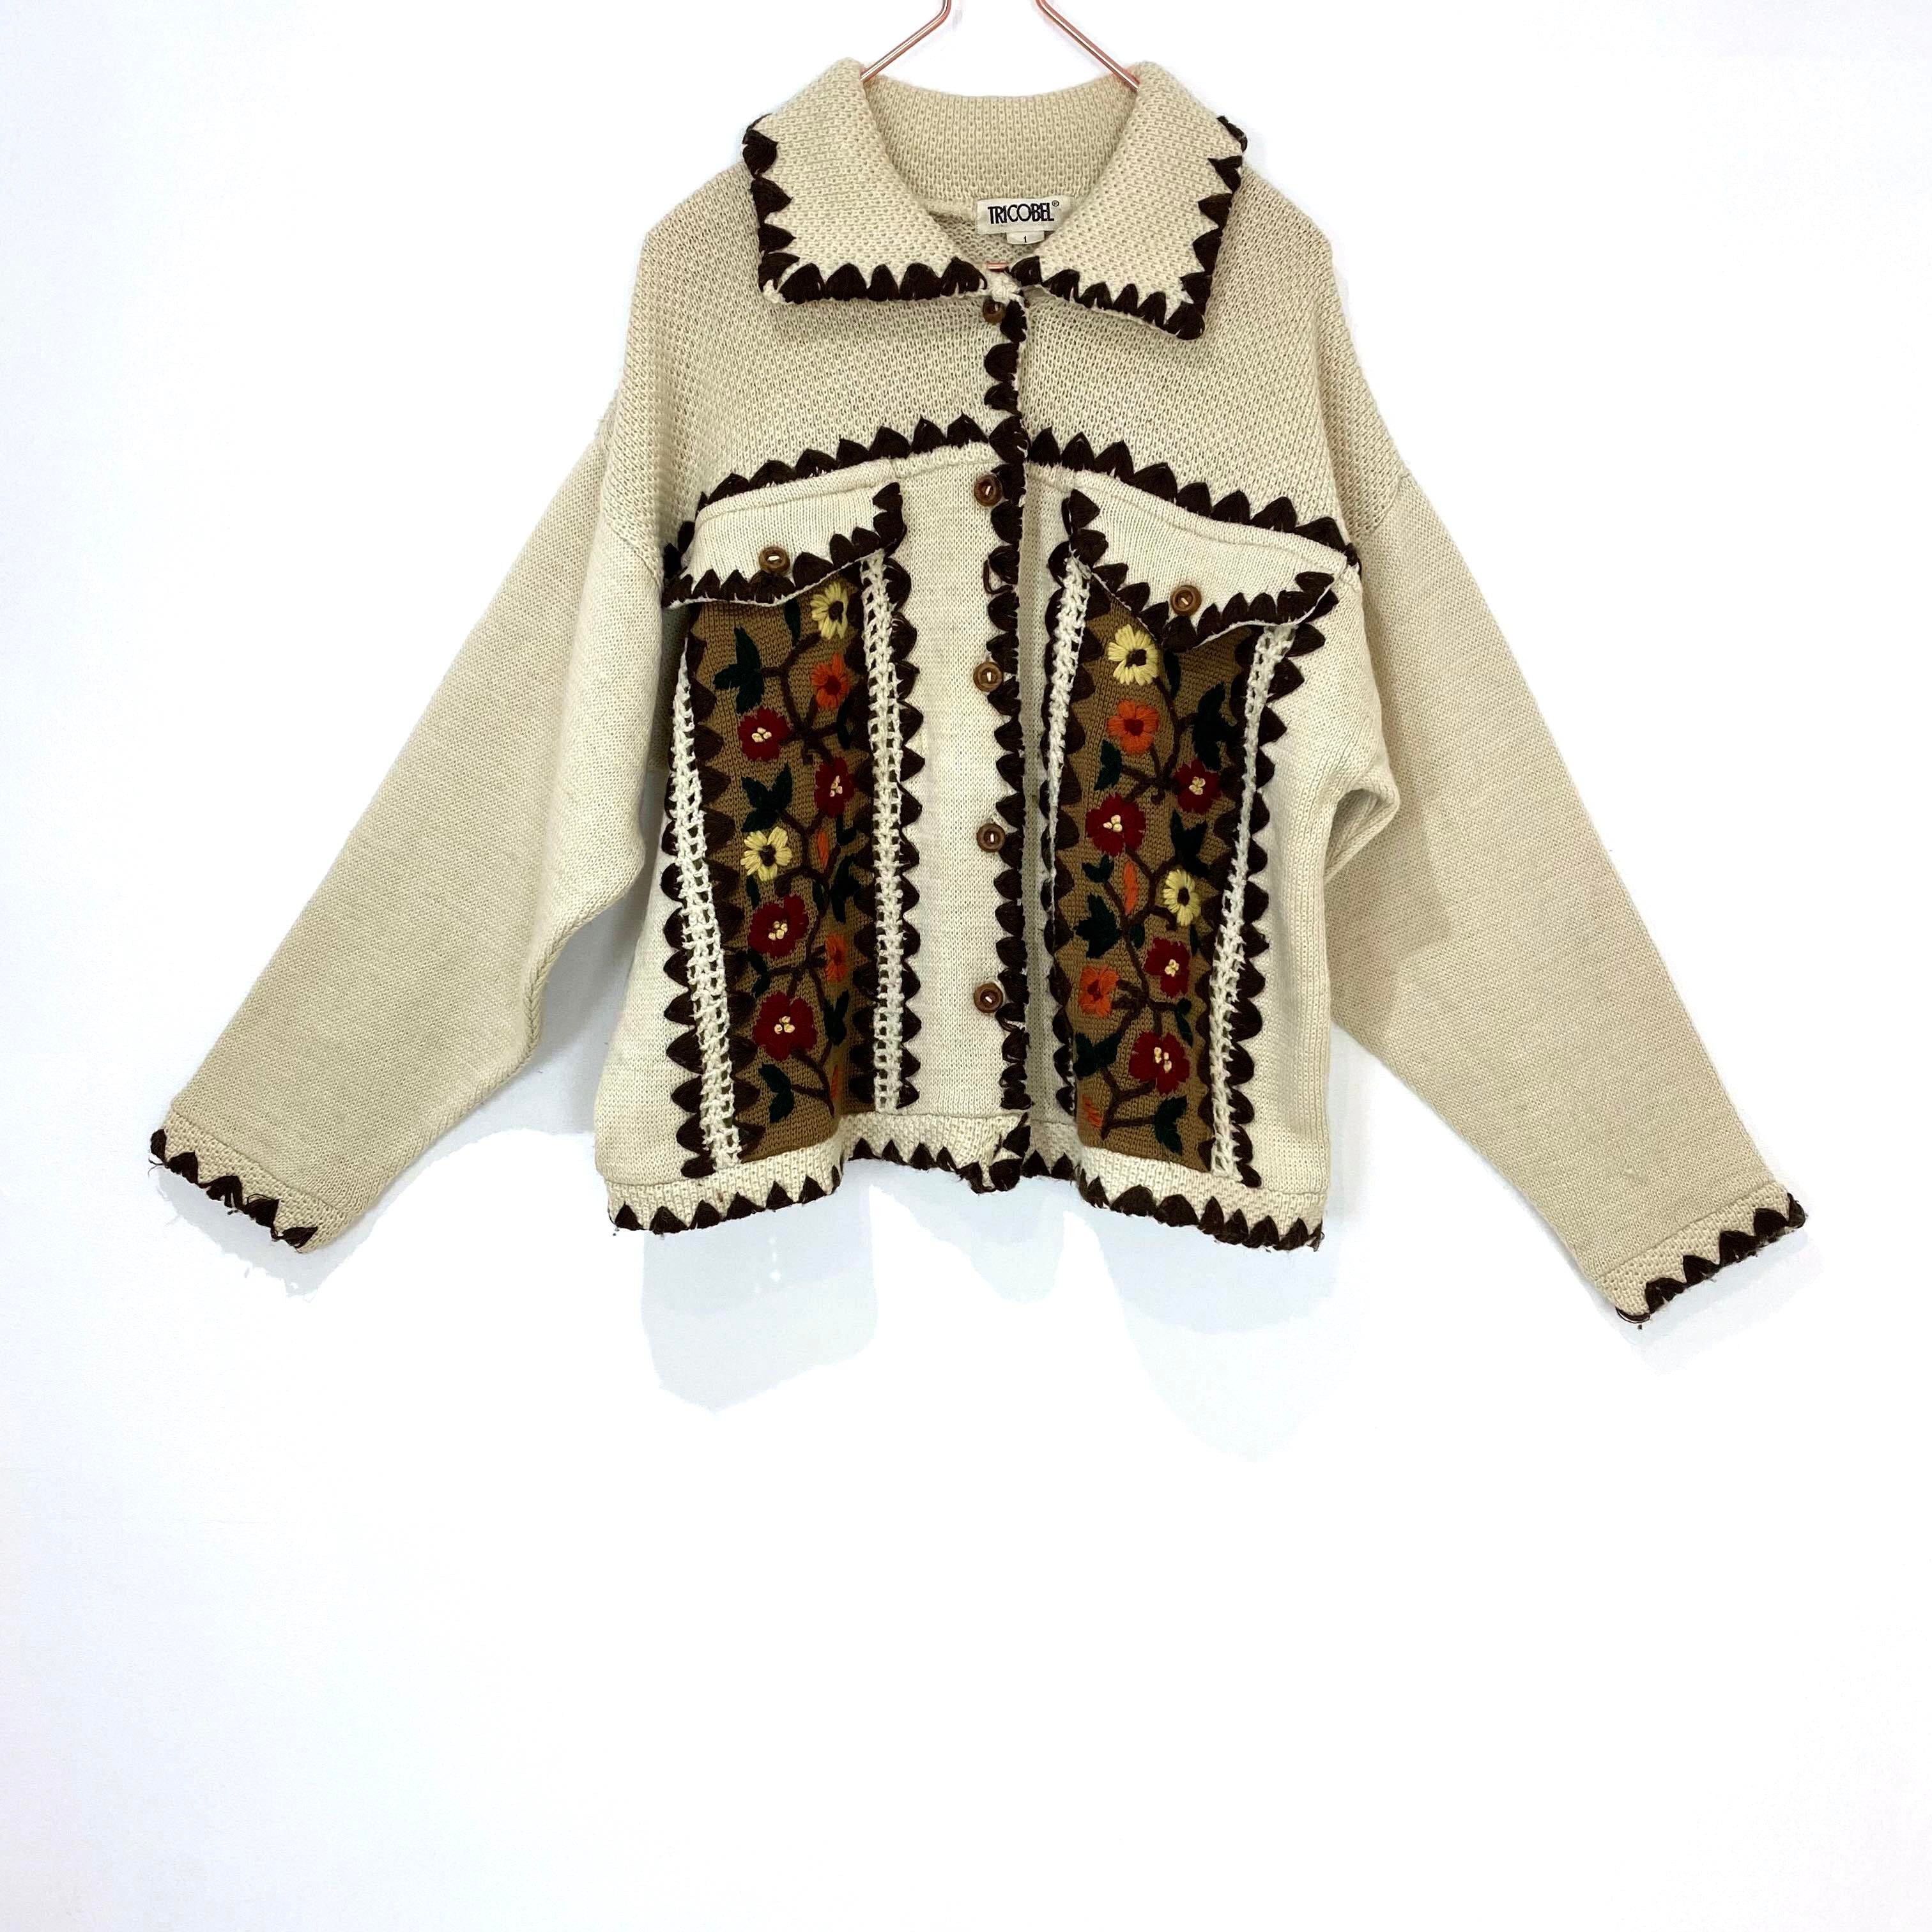 ◼︎80s vintage hand embroidery knit cardigan from France◼︎